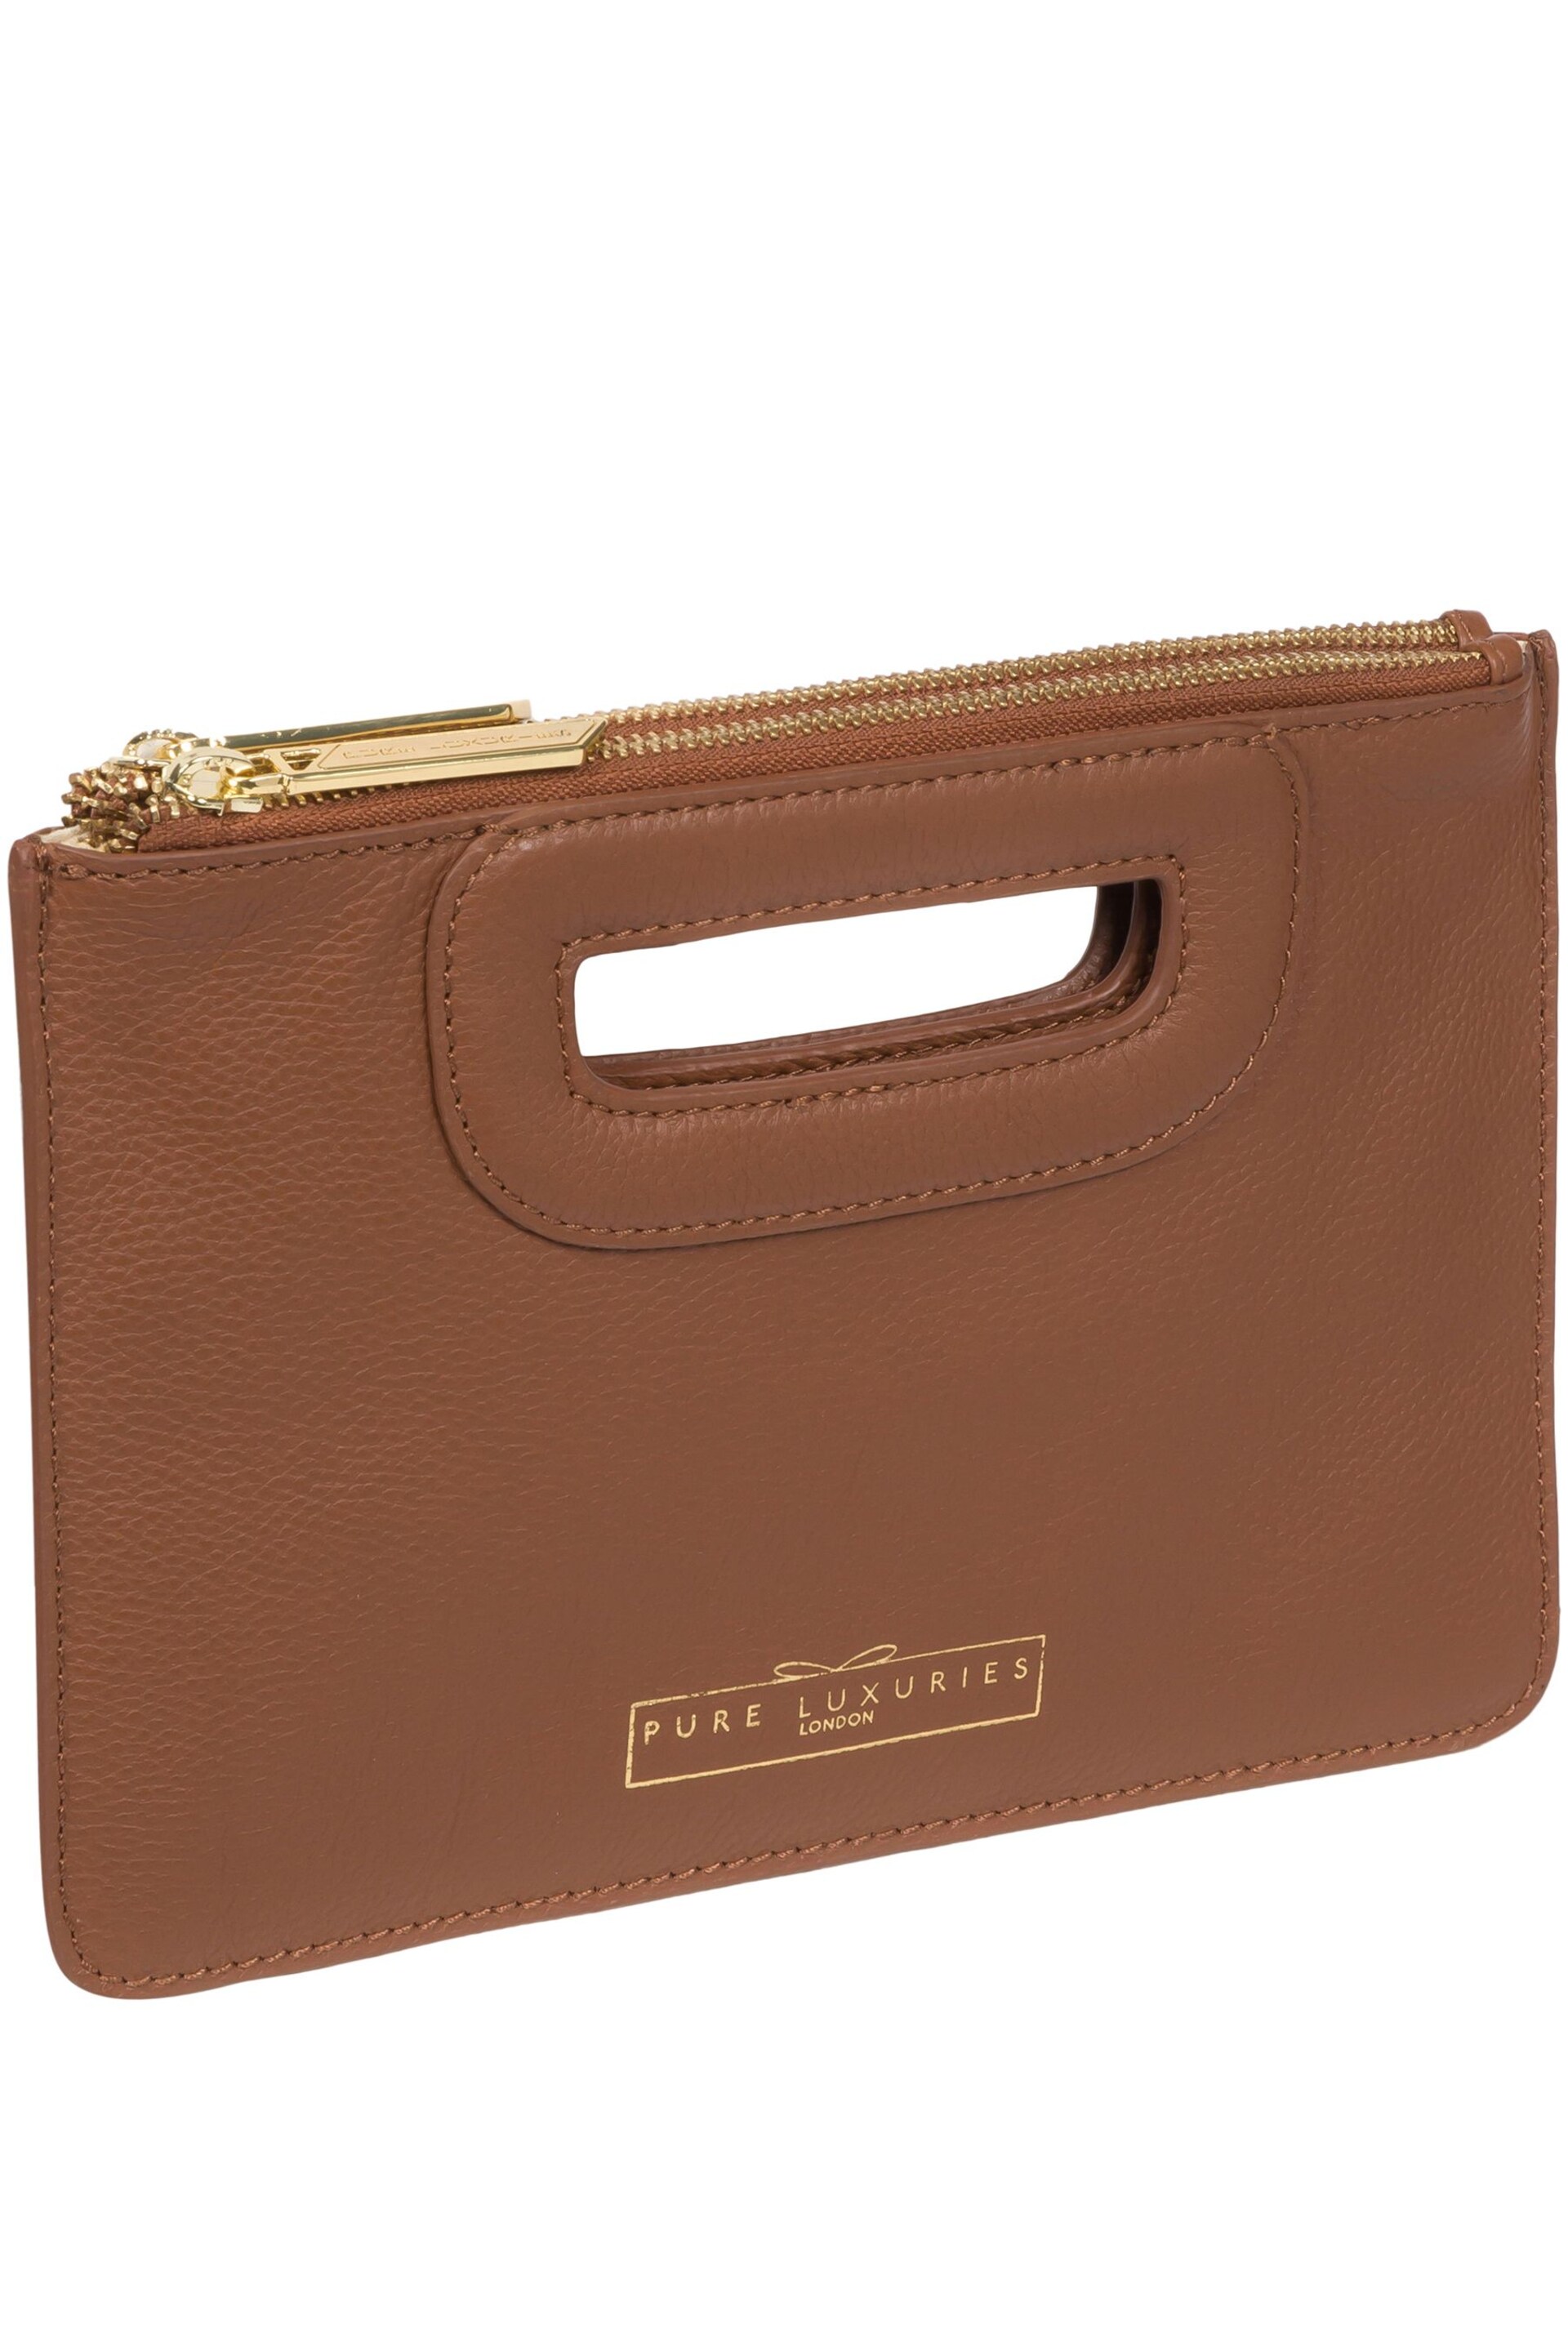 Pure Luxuries London Esher Leather Clutch Bag - Image 3 of 5